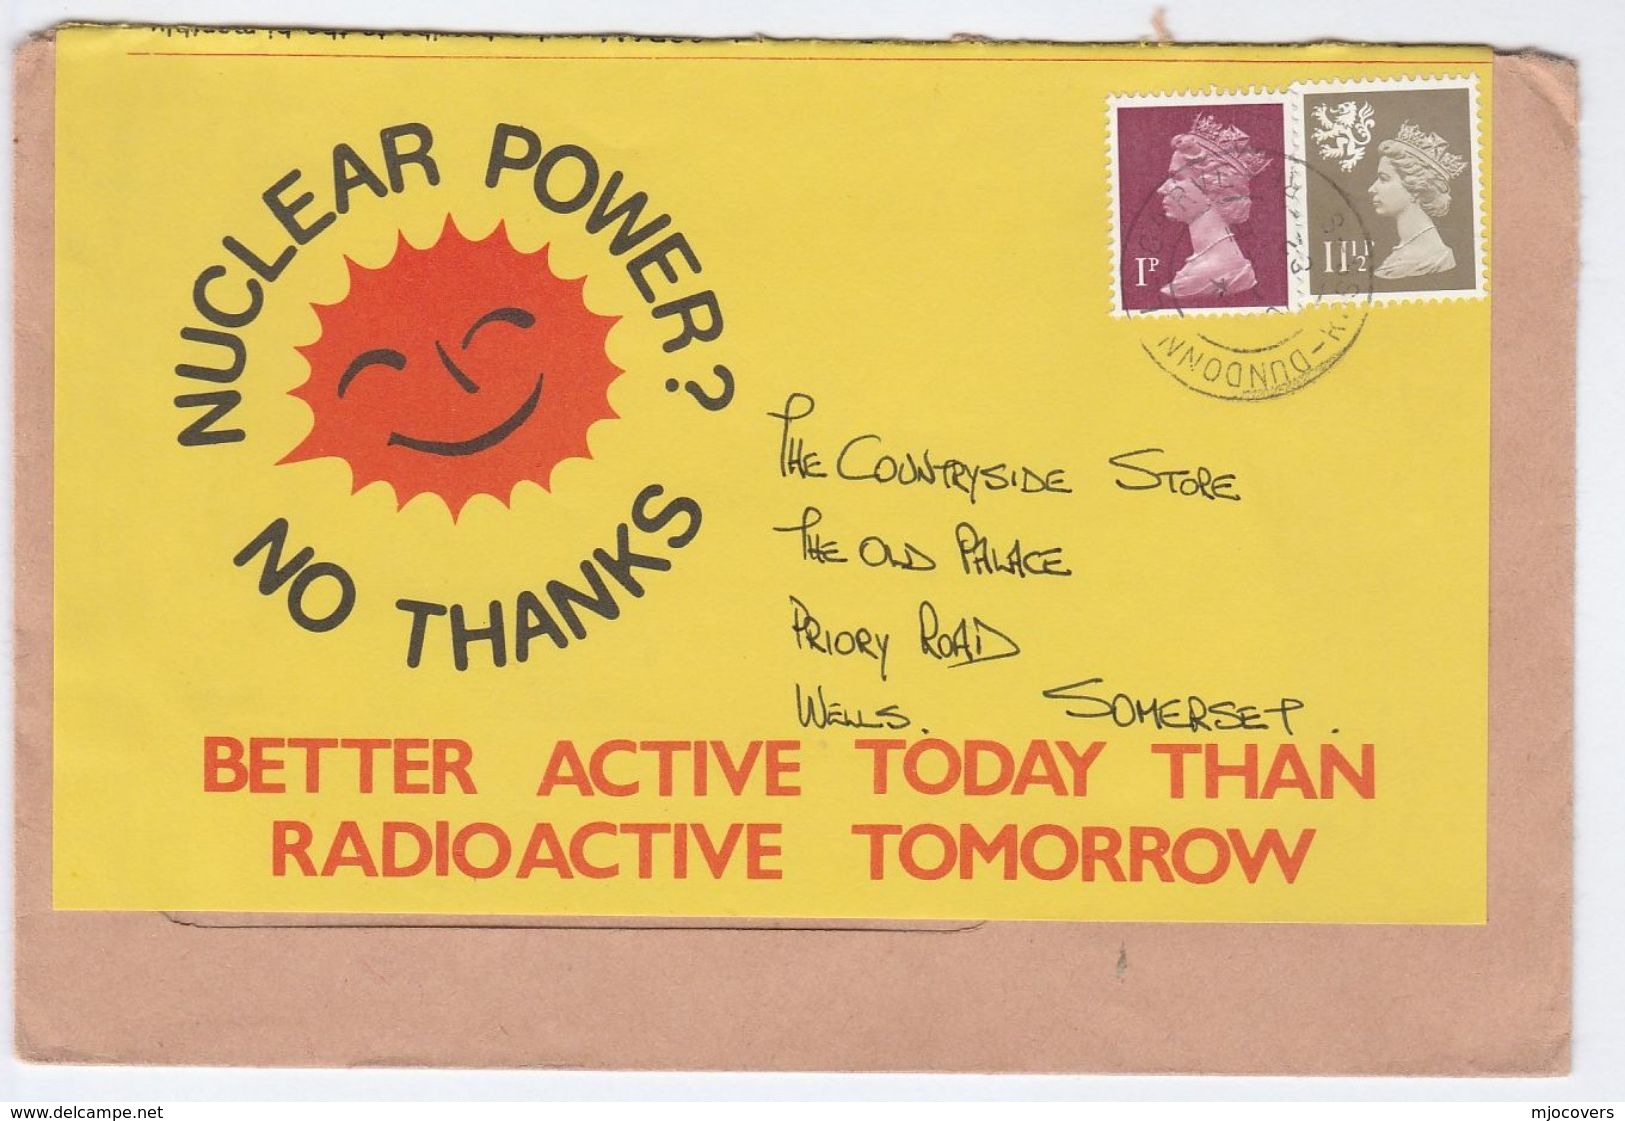 1982 Dundonnell NUCLEAR POWER NO THANKS COVER Re-use Label BETTER ACTIVE TODAY THAN RADIOACTIVE Atomic Energy Gb Stamps - Atomo